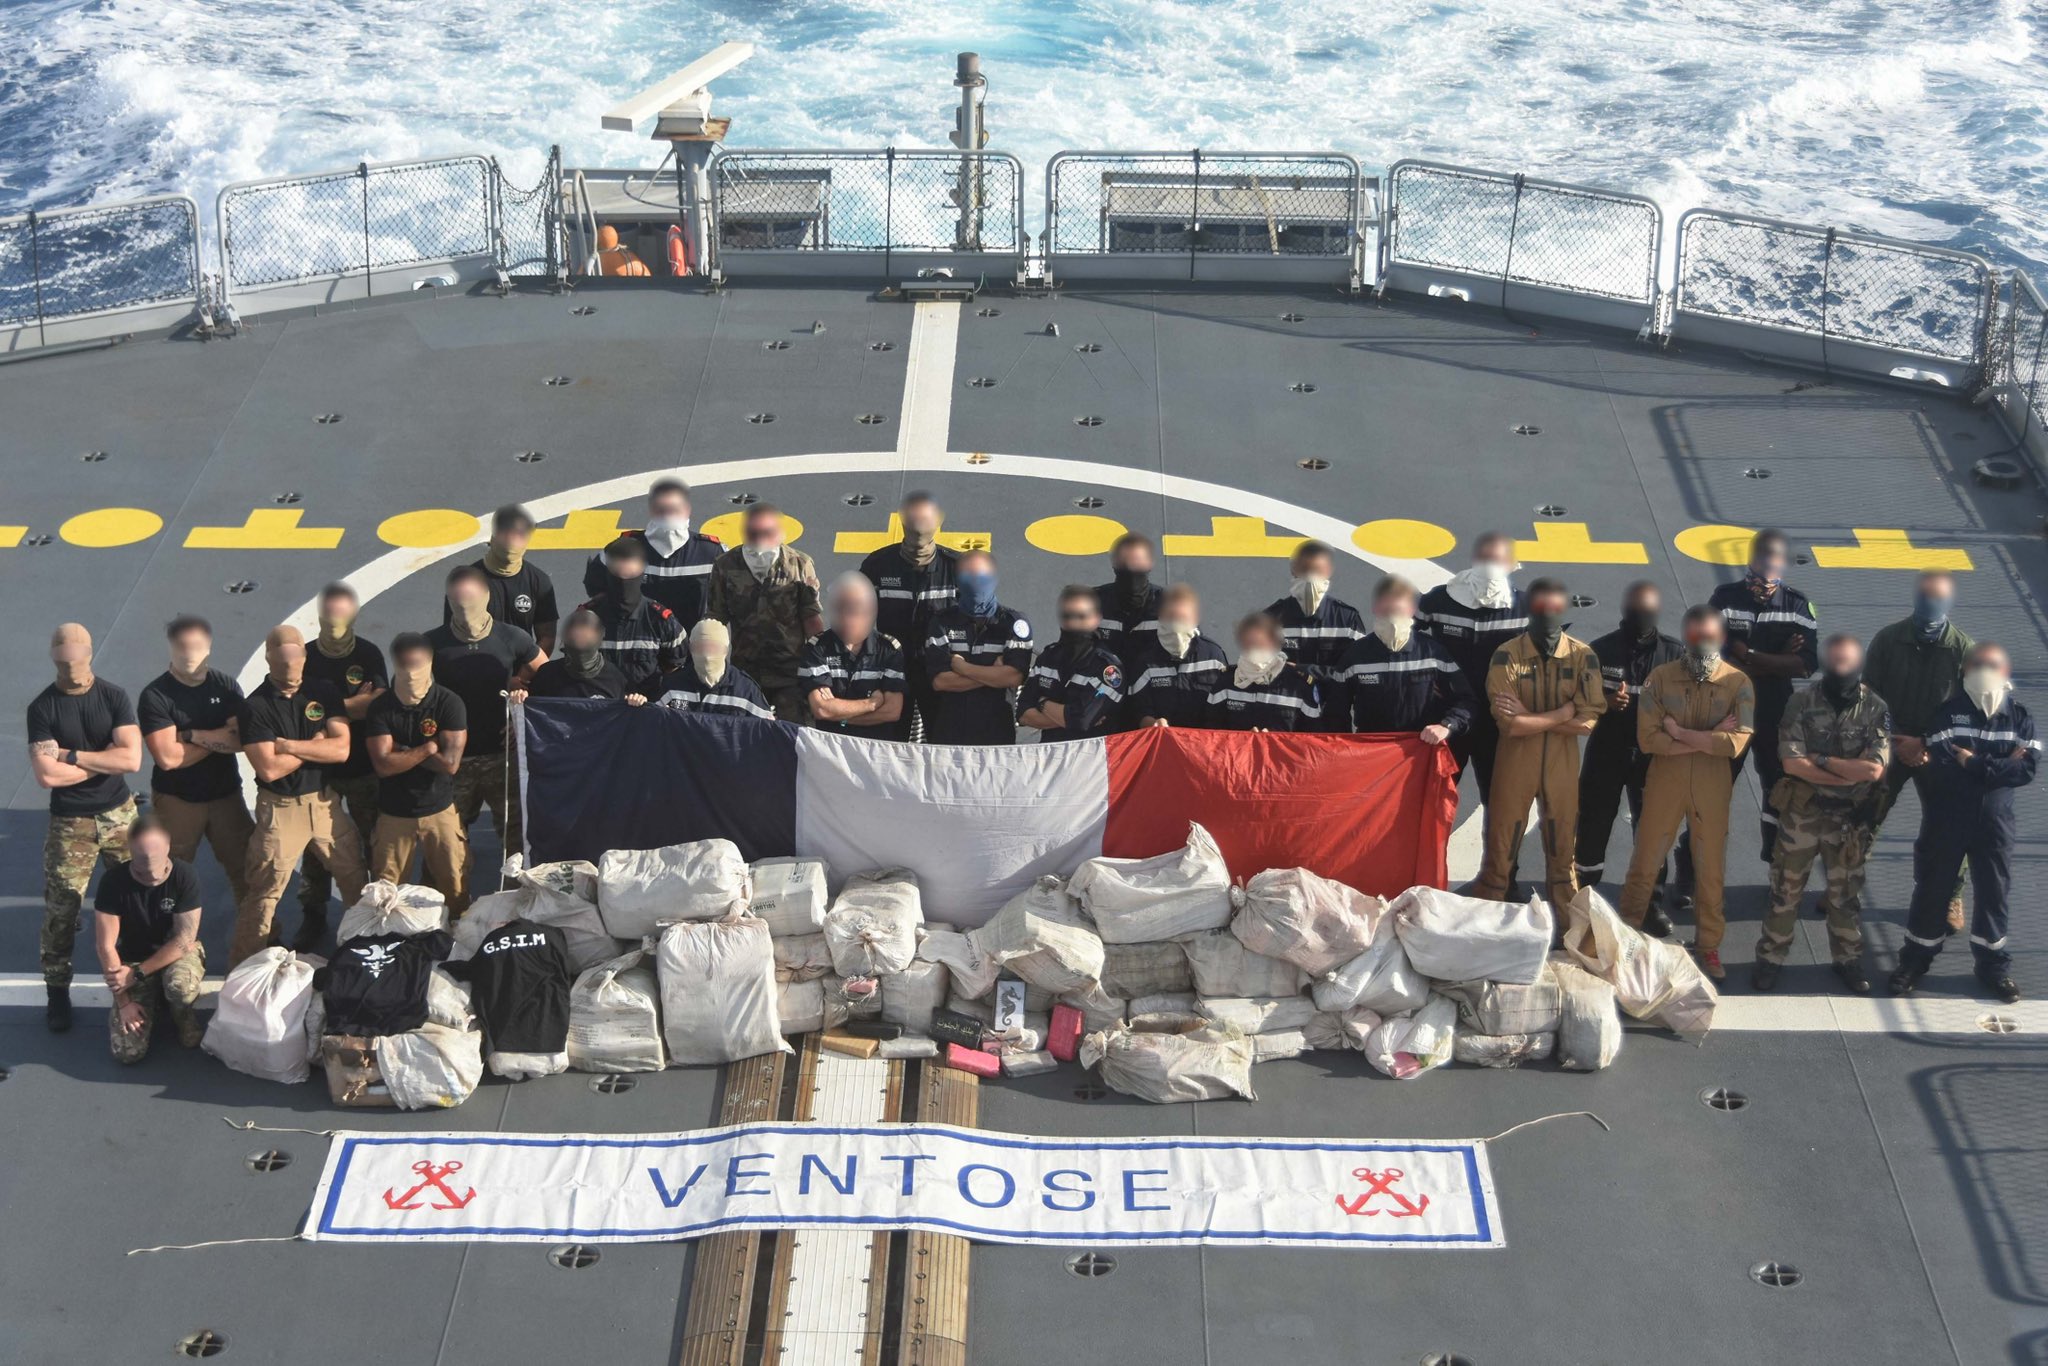 1.2 tonnes of cocaine worth an estimated £96m seized on the Ventose boat.